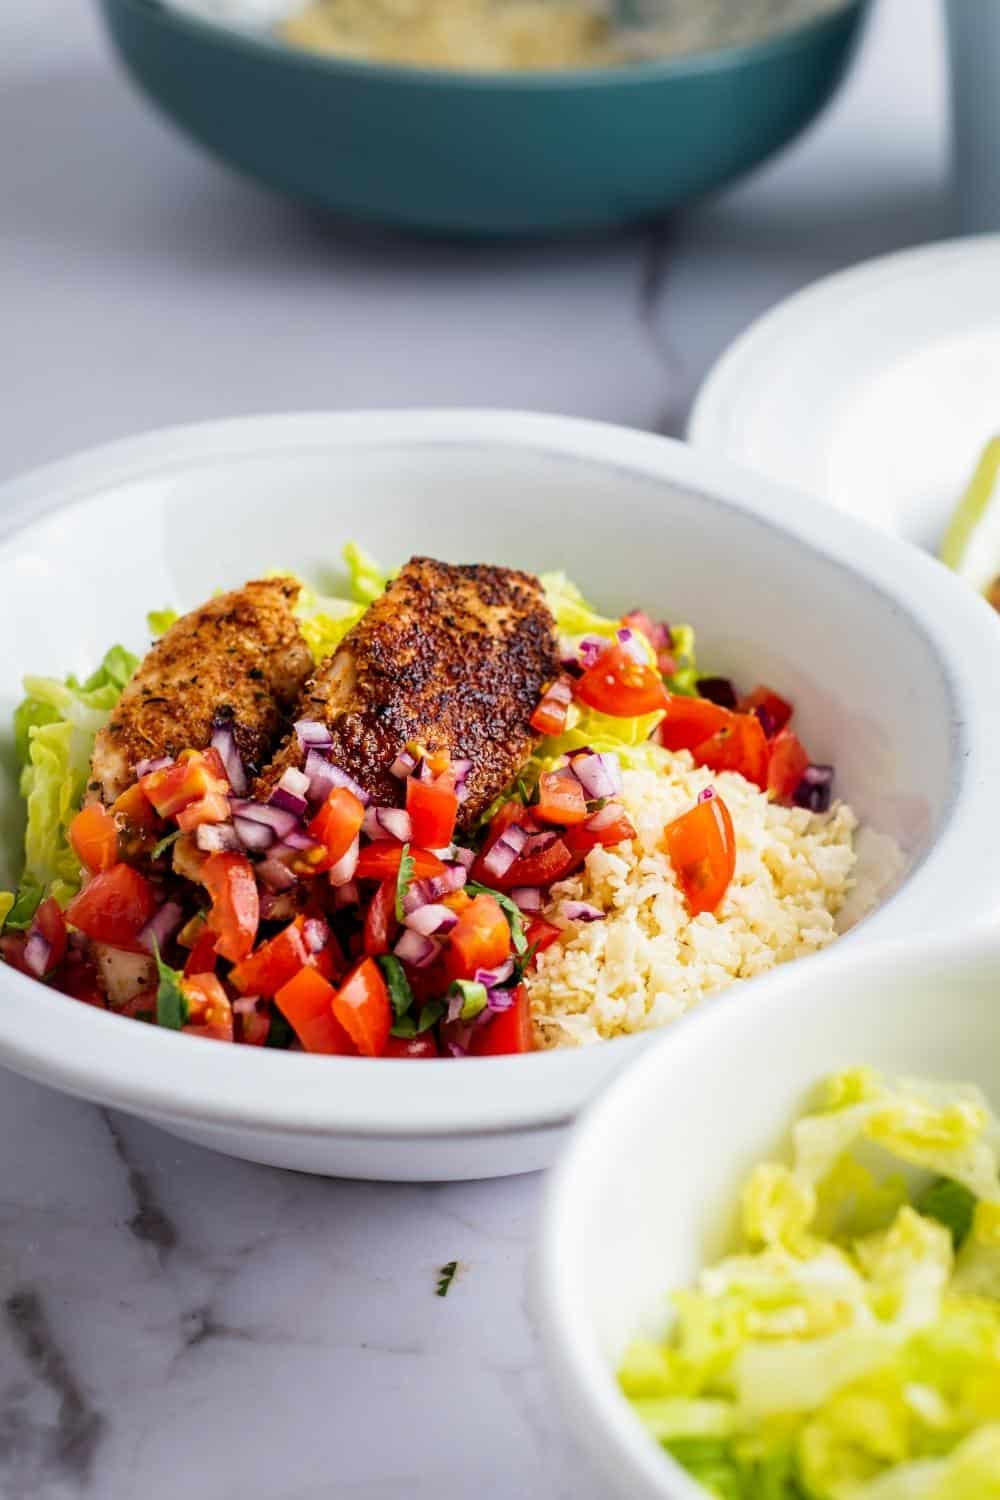 Chicken, pico, cauliflower rice, and lettuce in a bowl.